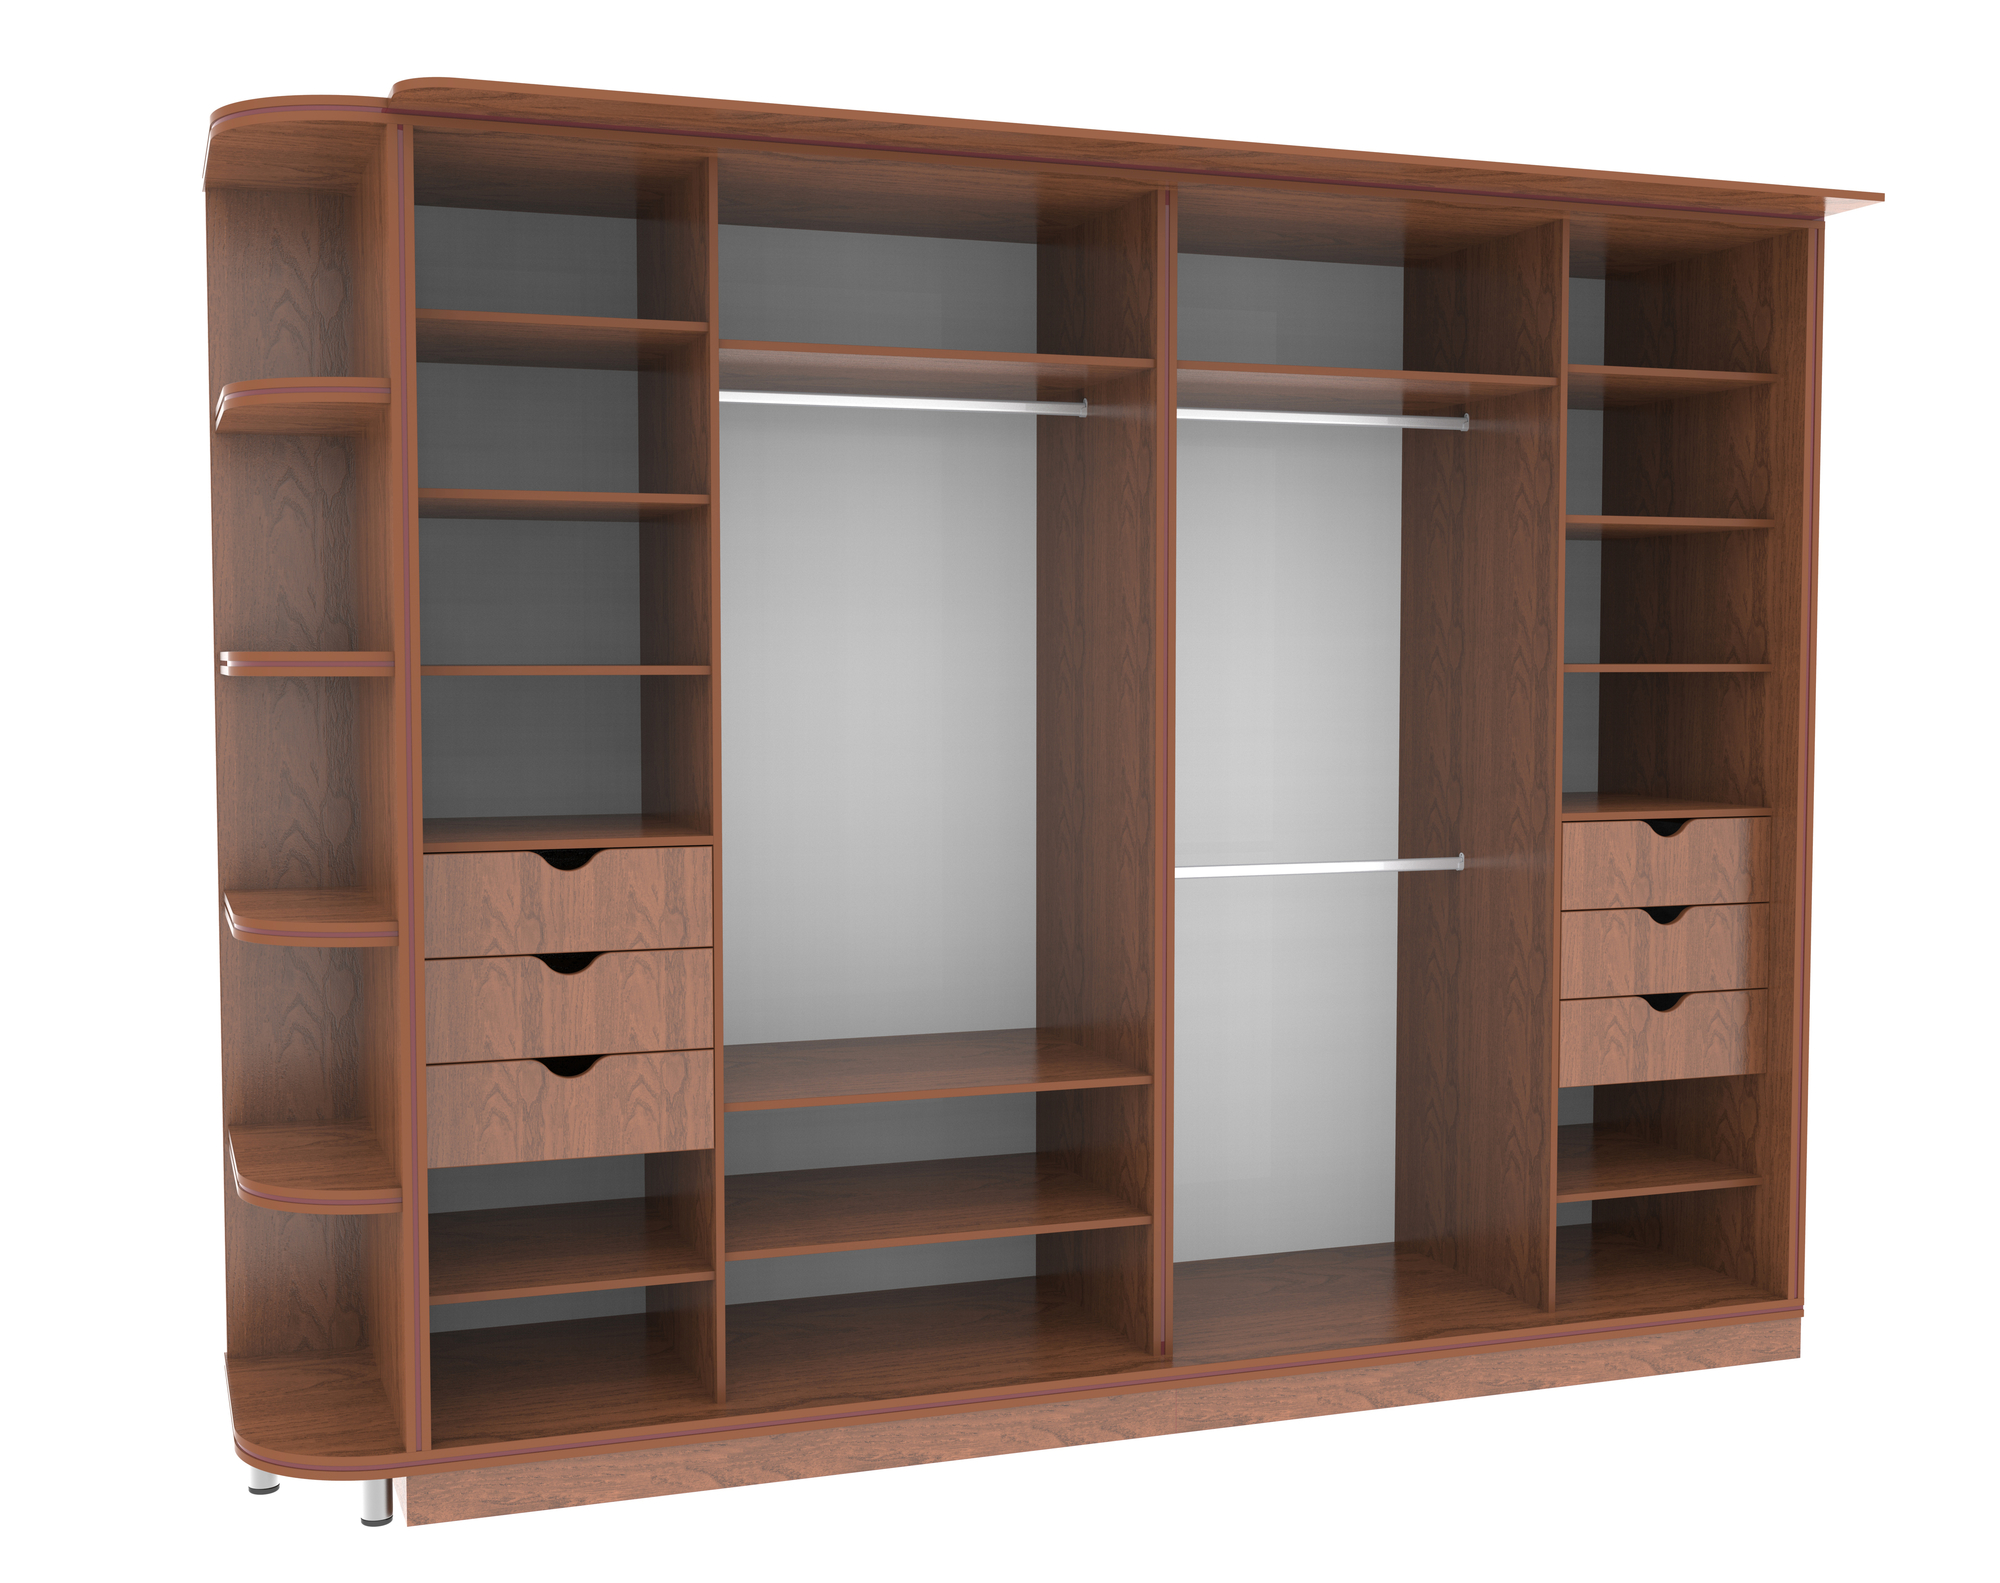 Flat Pack Furniture Assembly Service in Knightsbridge